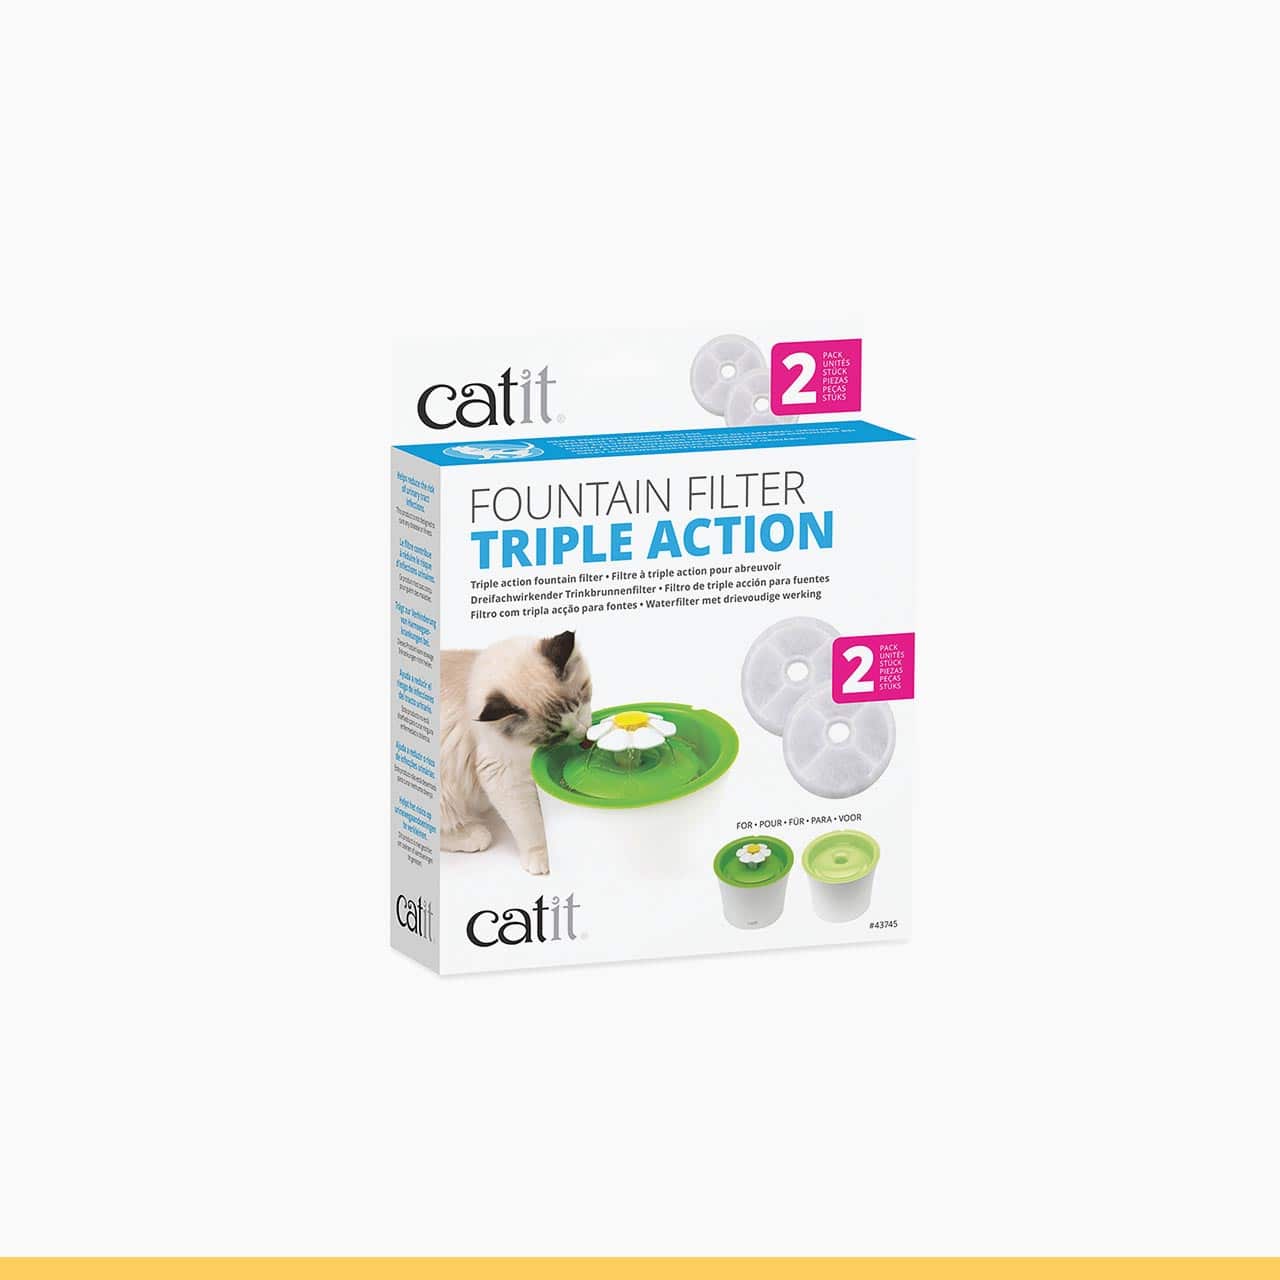 Catit Triple Action Fountain Filters